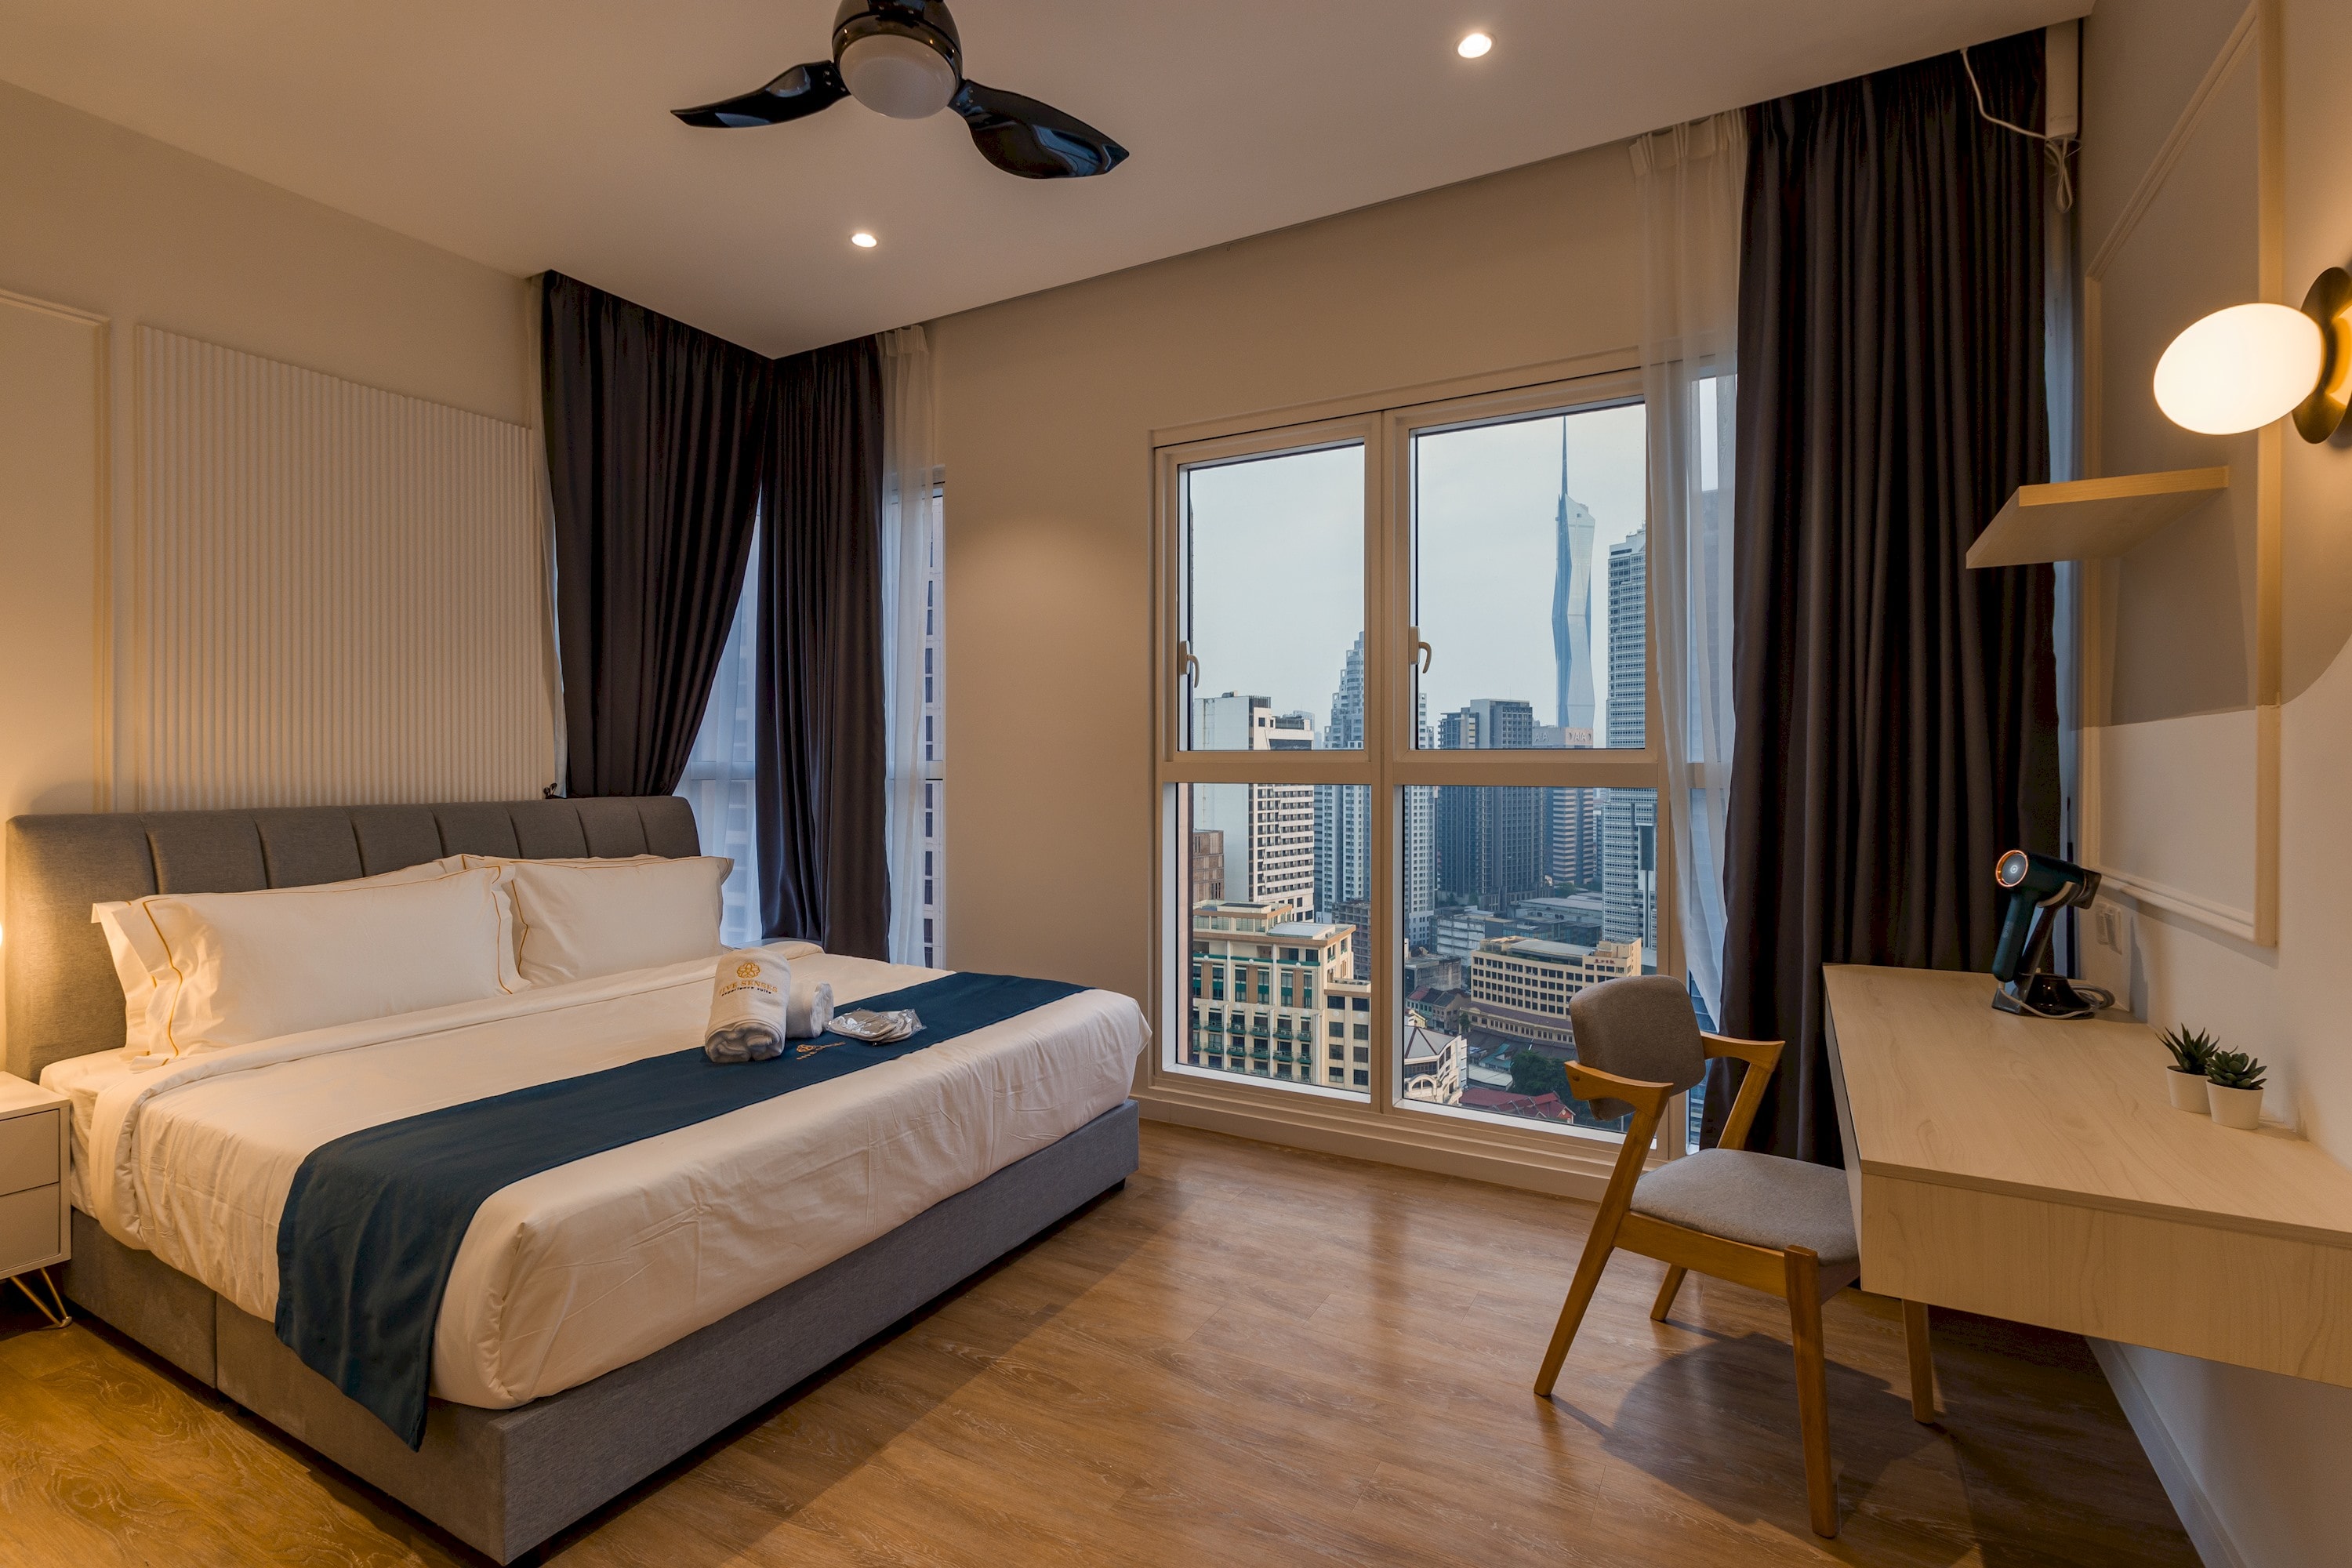 Premium Bedrooms, Quill City Mall Residences KLCC